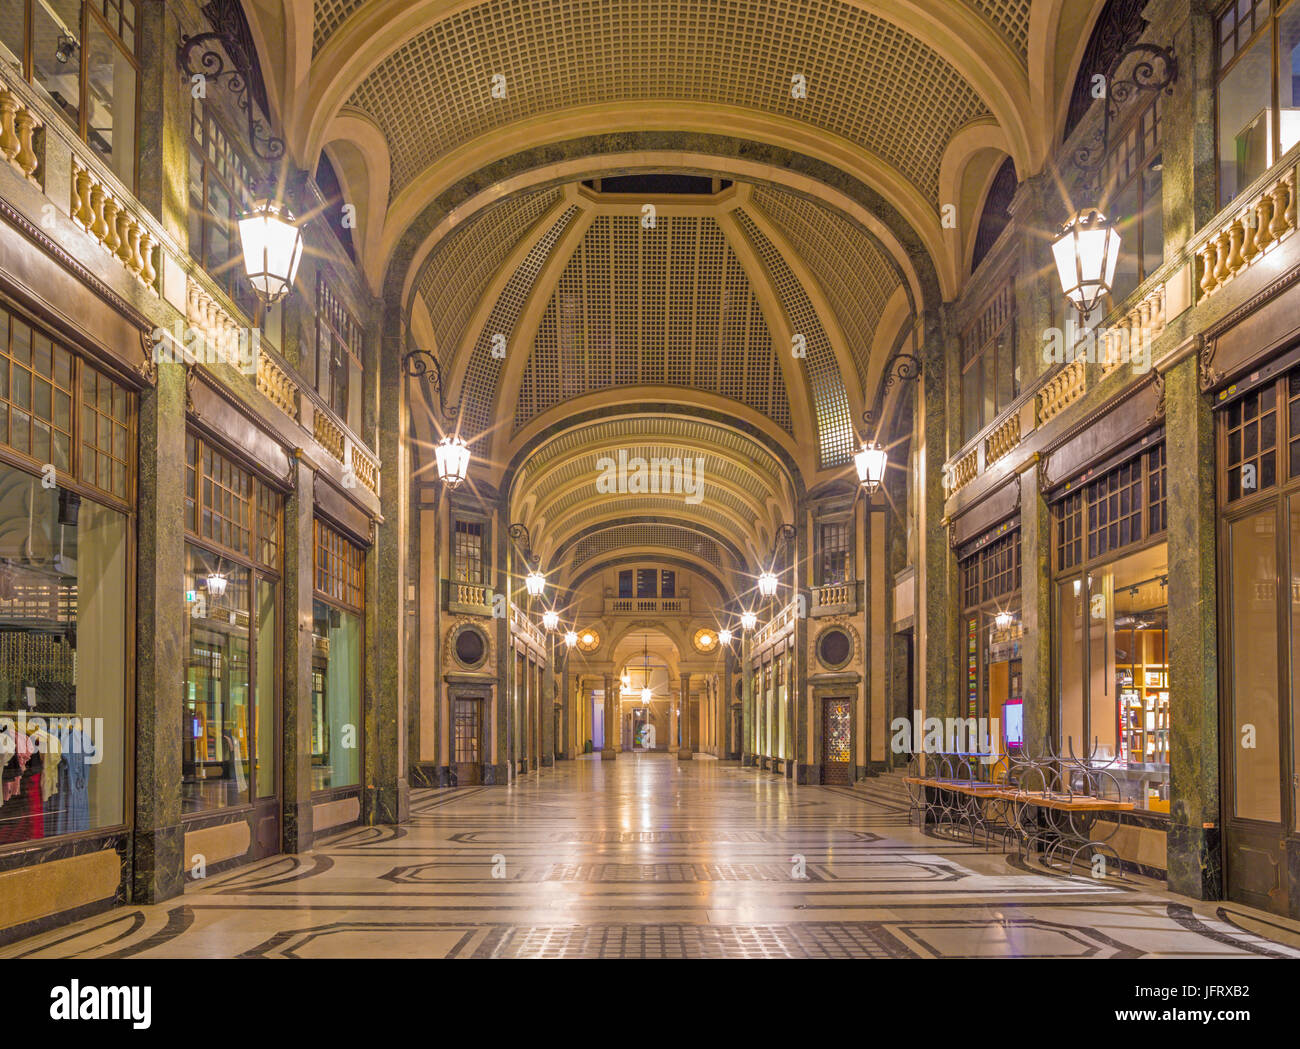 Turin - The shopping gallery at night. Stock Photo